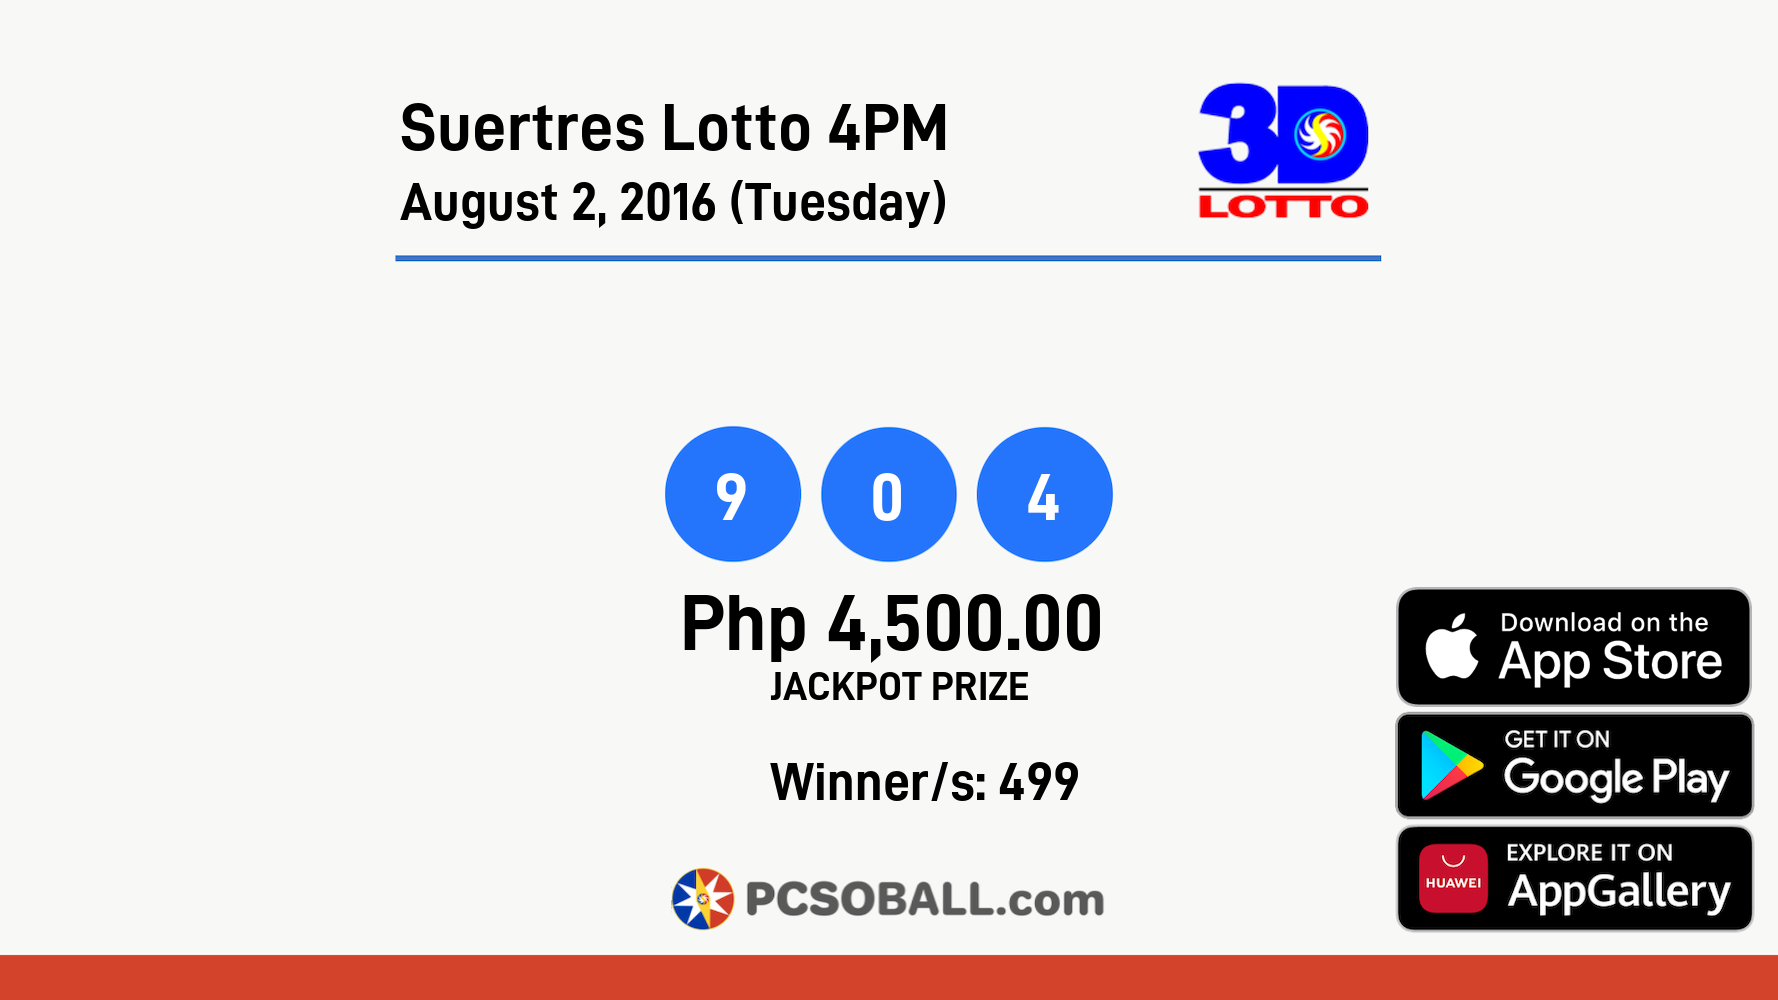 Suertres Lotto 4PM August 2, 2016 (Tuesday) Result